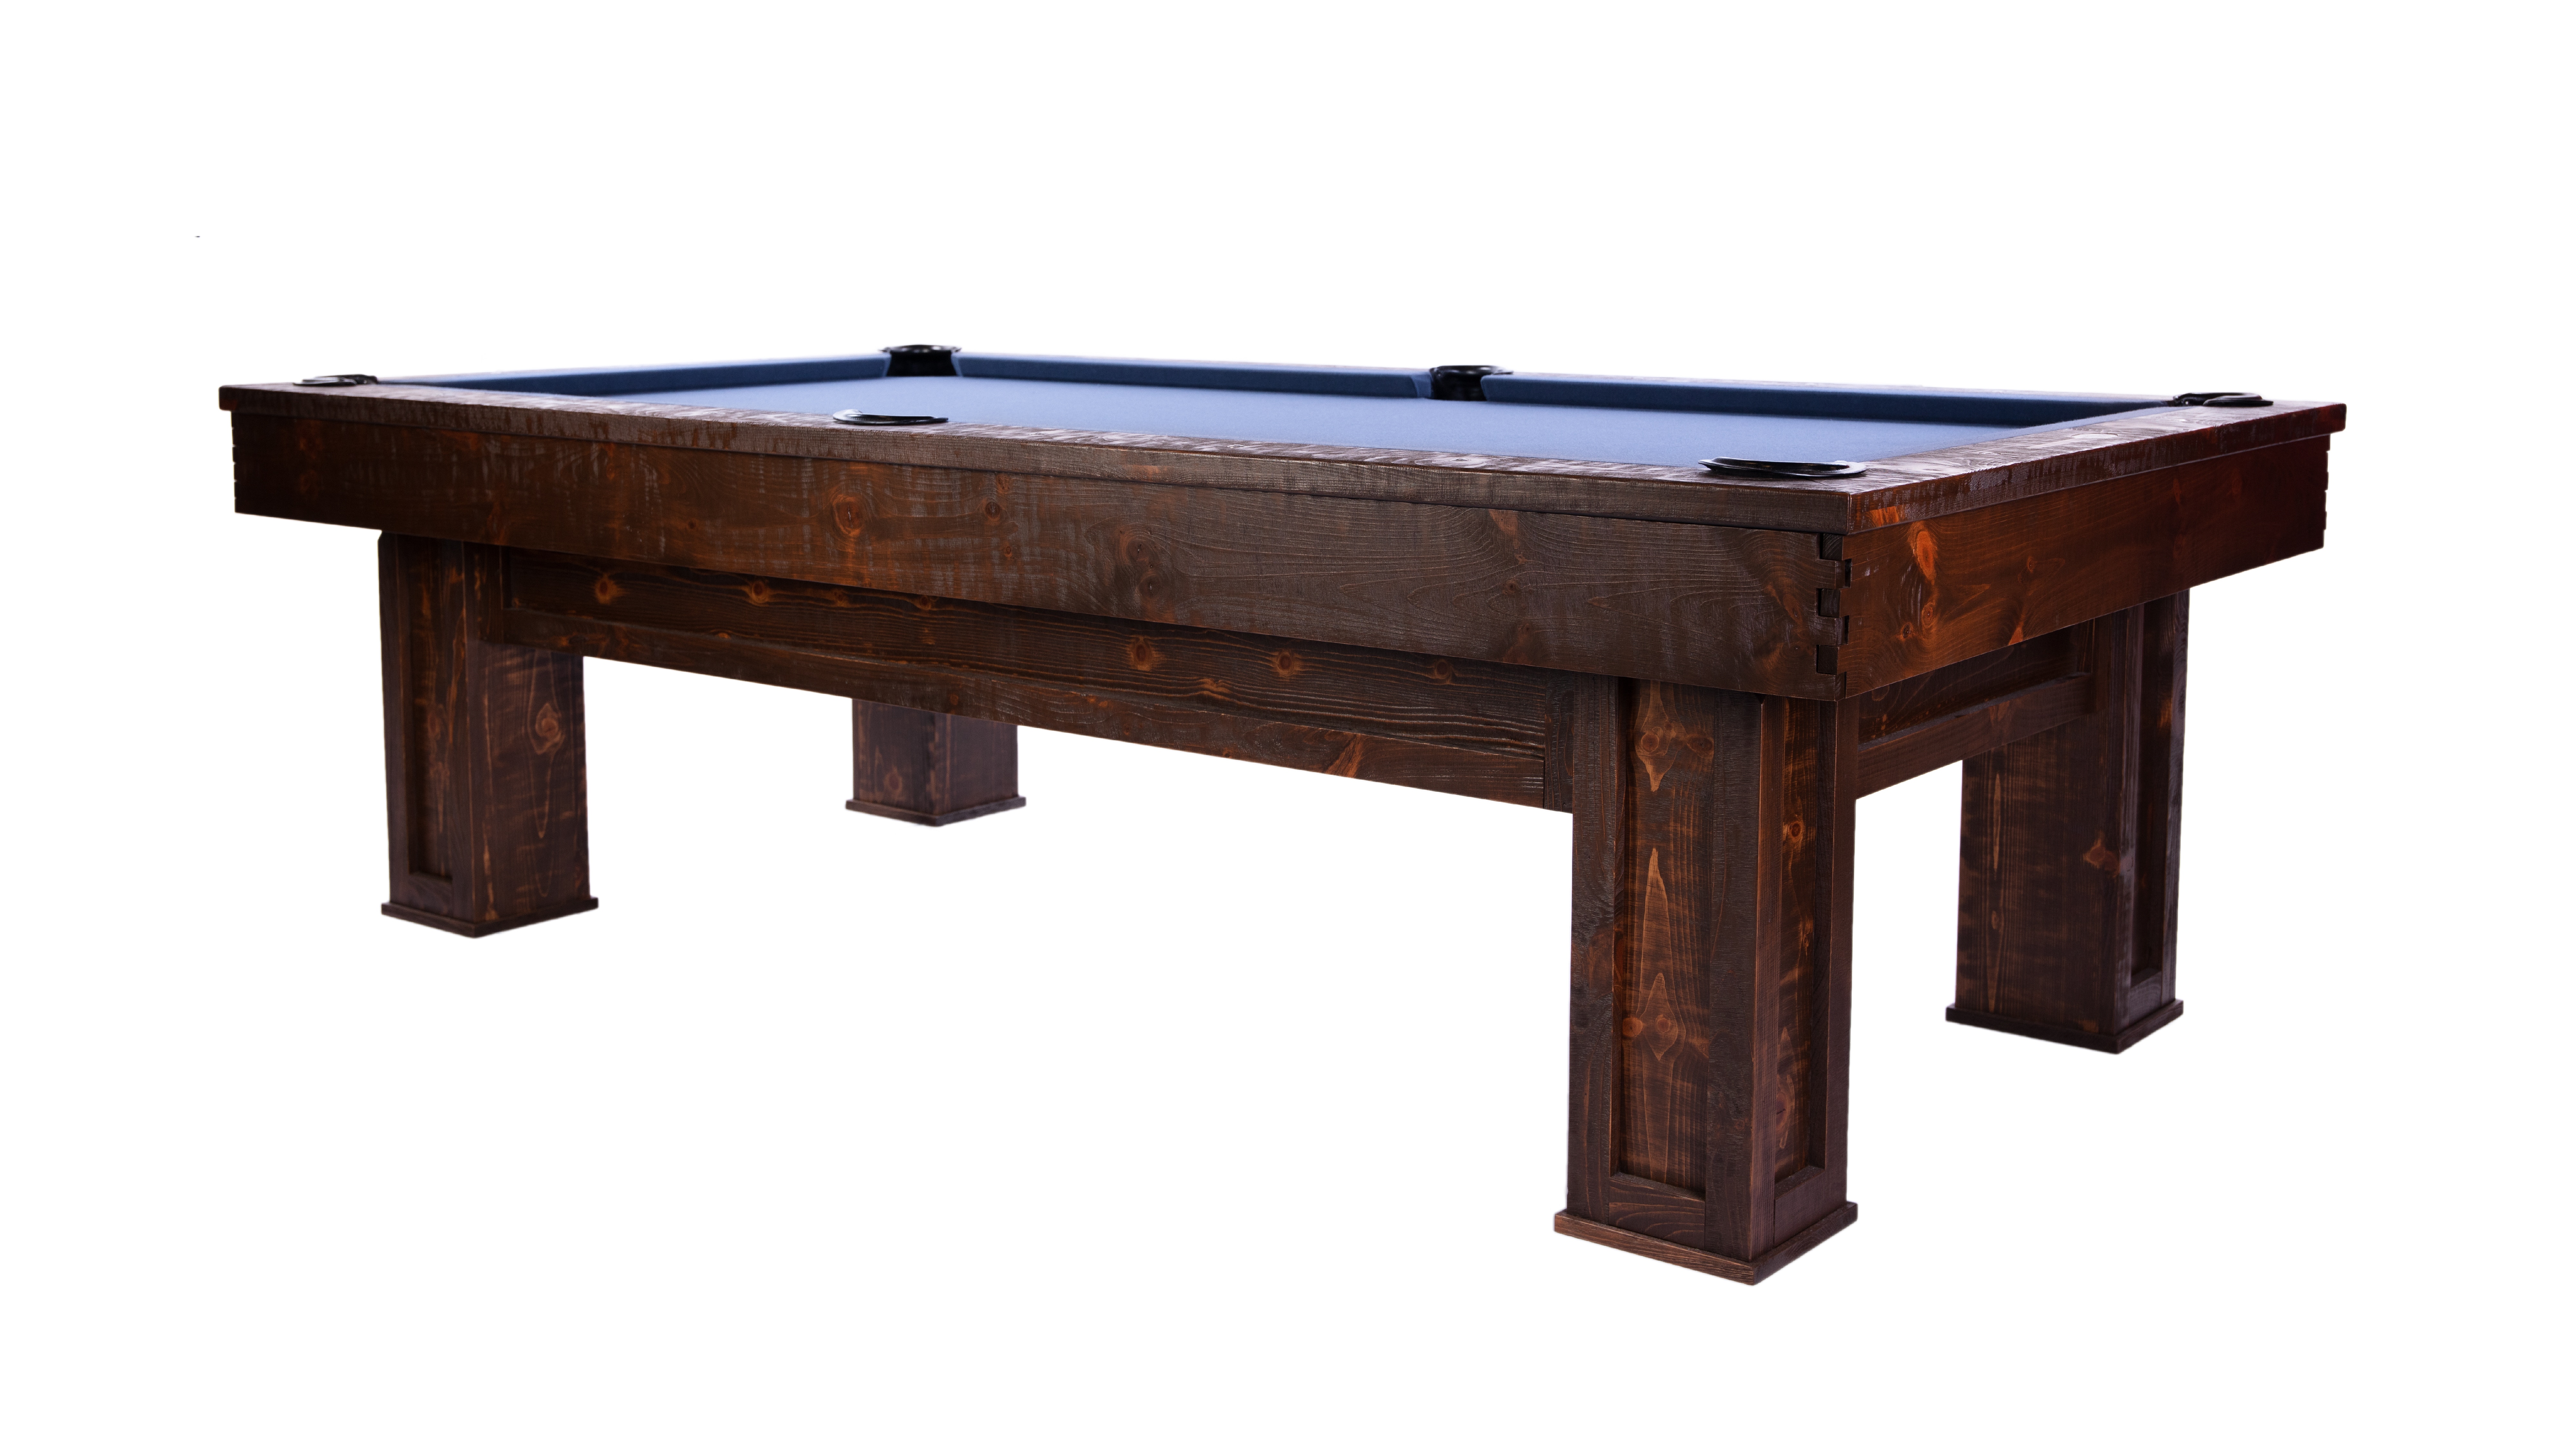 used golden west billiards pool table for sale